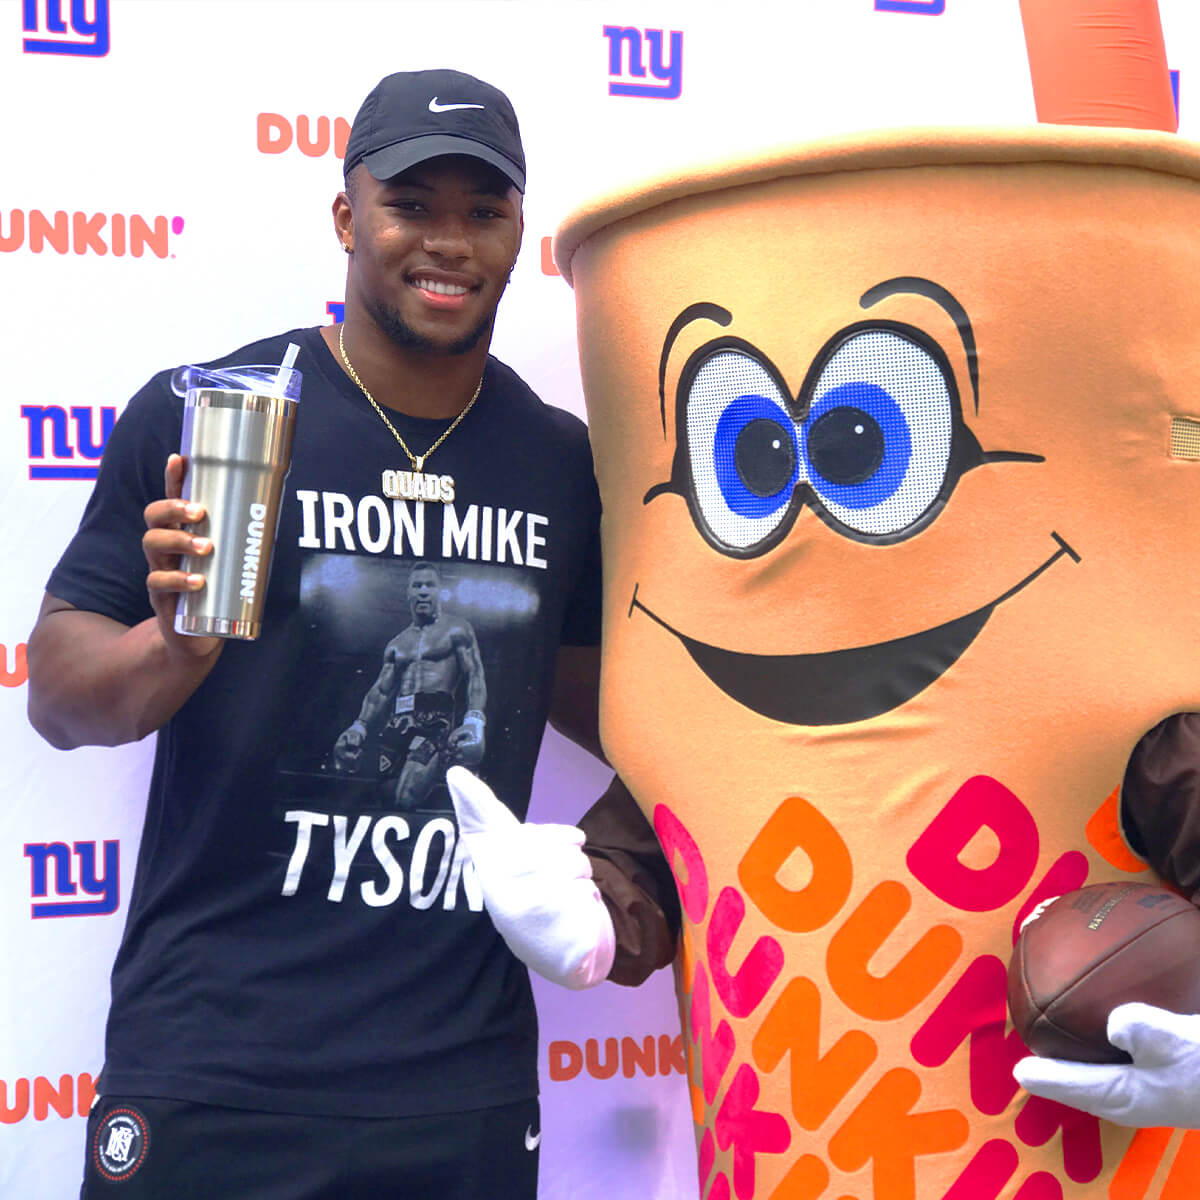 New York Giants Running Back, Saquon Barkley posing with the Dunkin' mascot and holding a Dunkin' branded cup